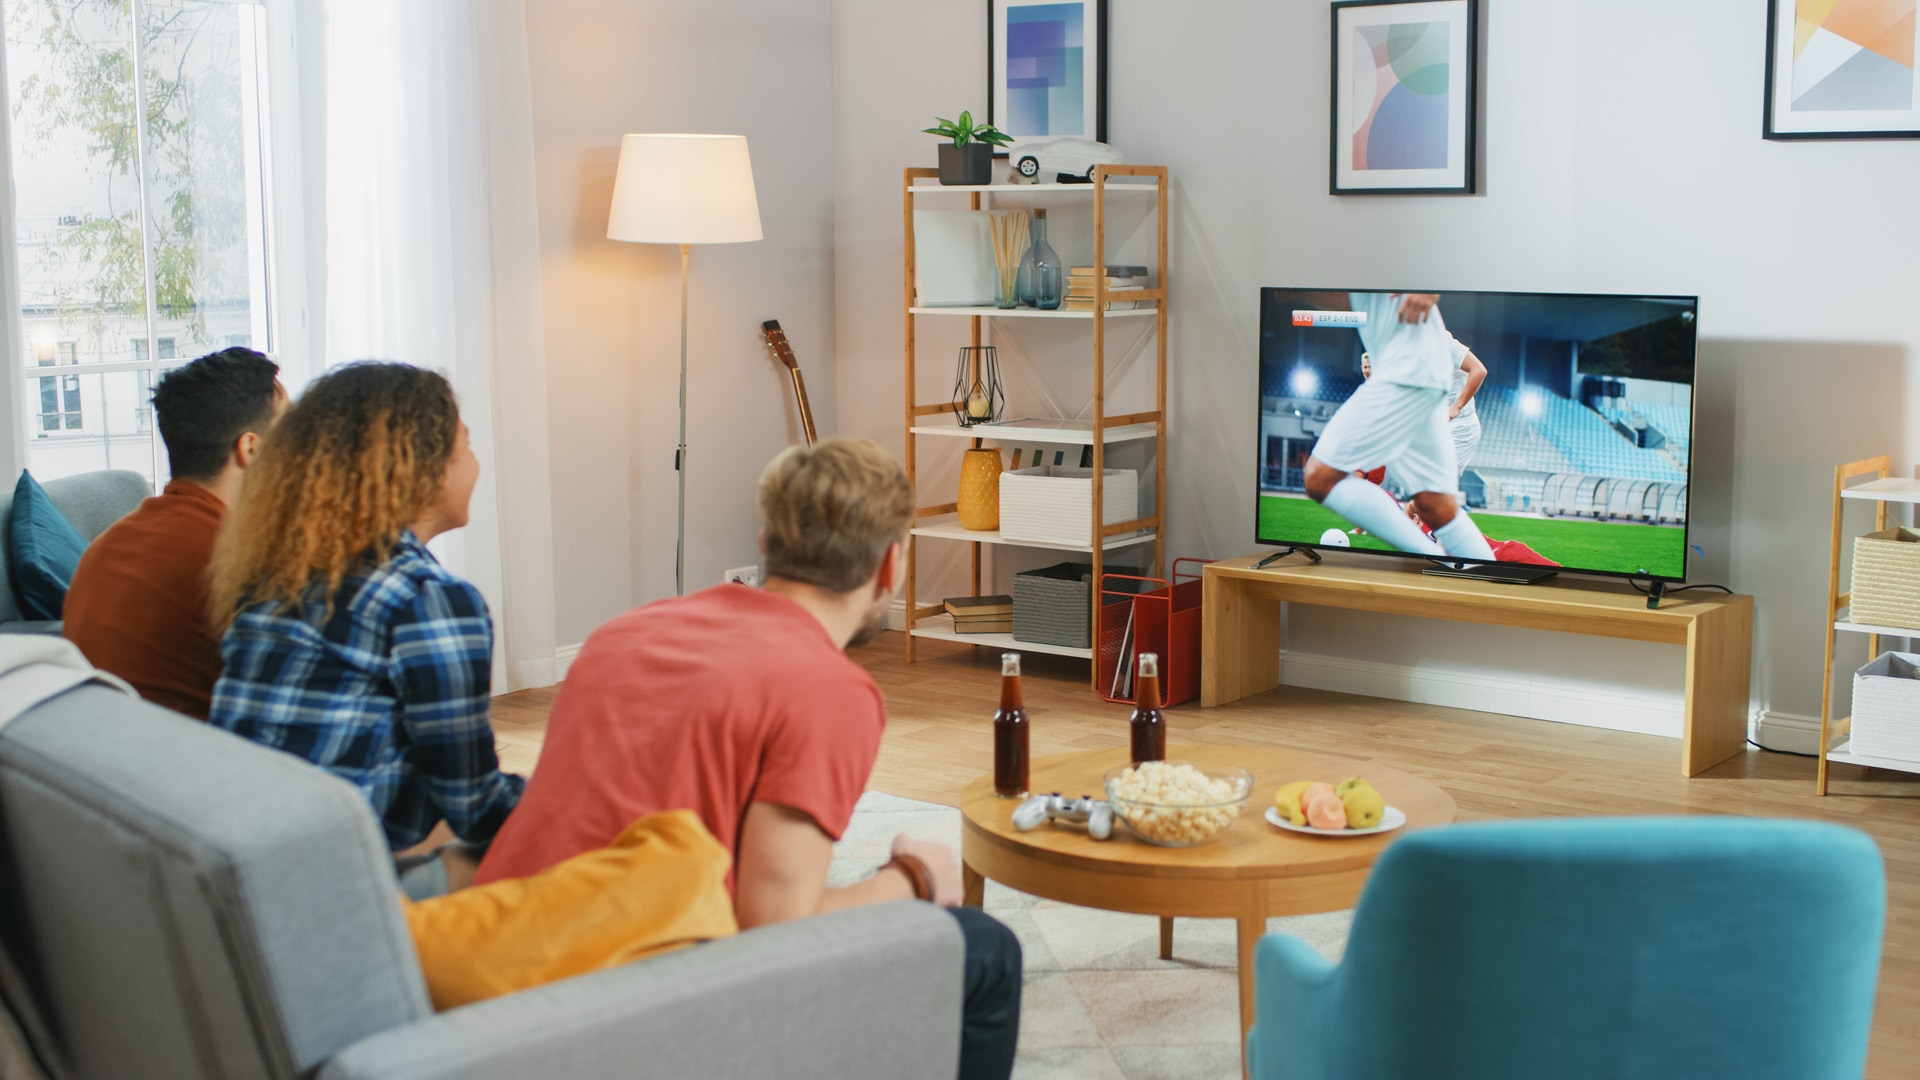 Three Sports Fans Sitting on a Couch in the Living Room Watch Important Soccer Match, Worry and Cheering For their Team. Bright Cozy Apartment with Friends Eating Snacks and Having Fun.; Shutterstock ID 1523339435; purchase_order: -; job: -; client: -; other: -